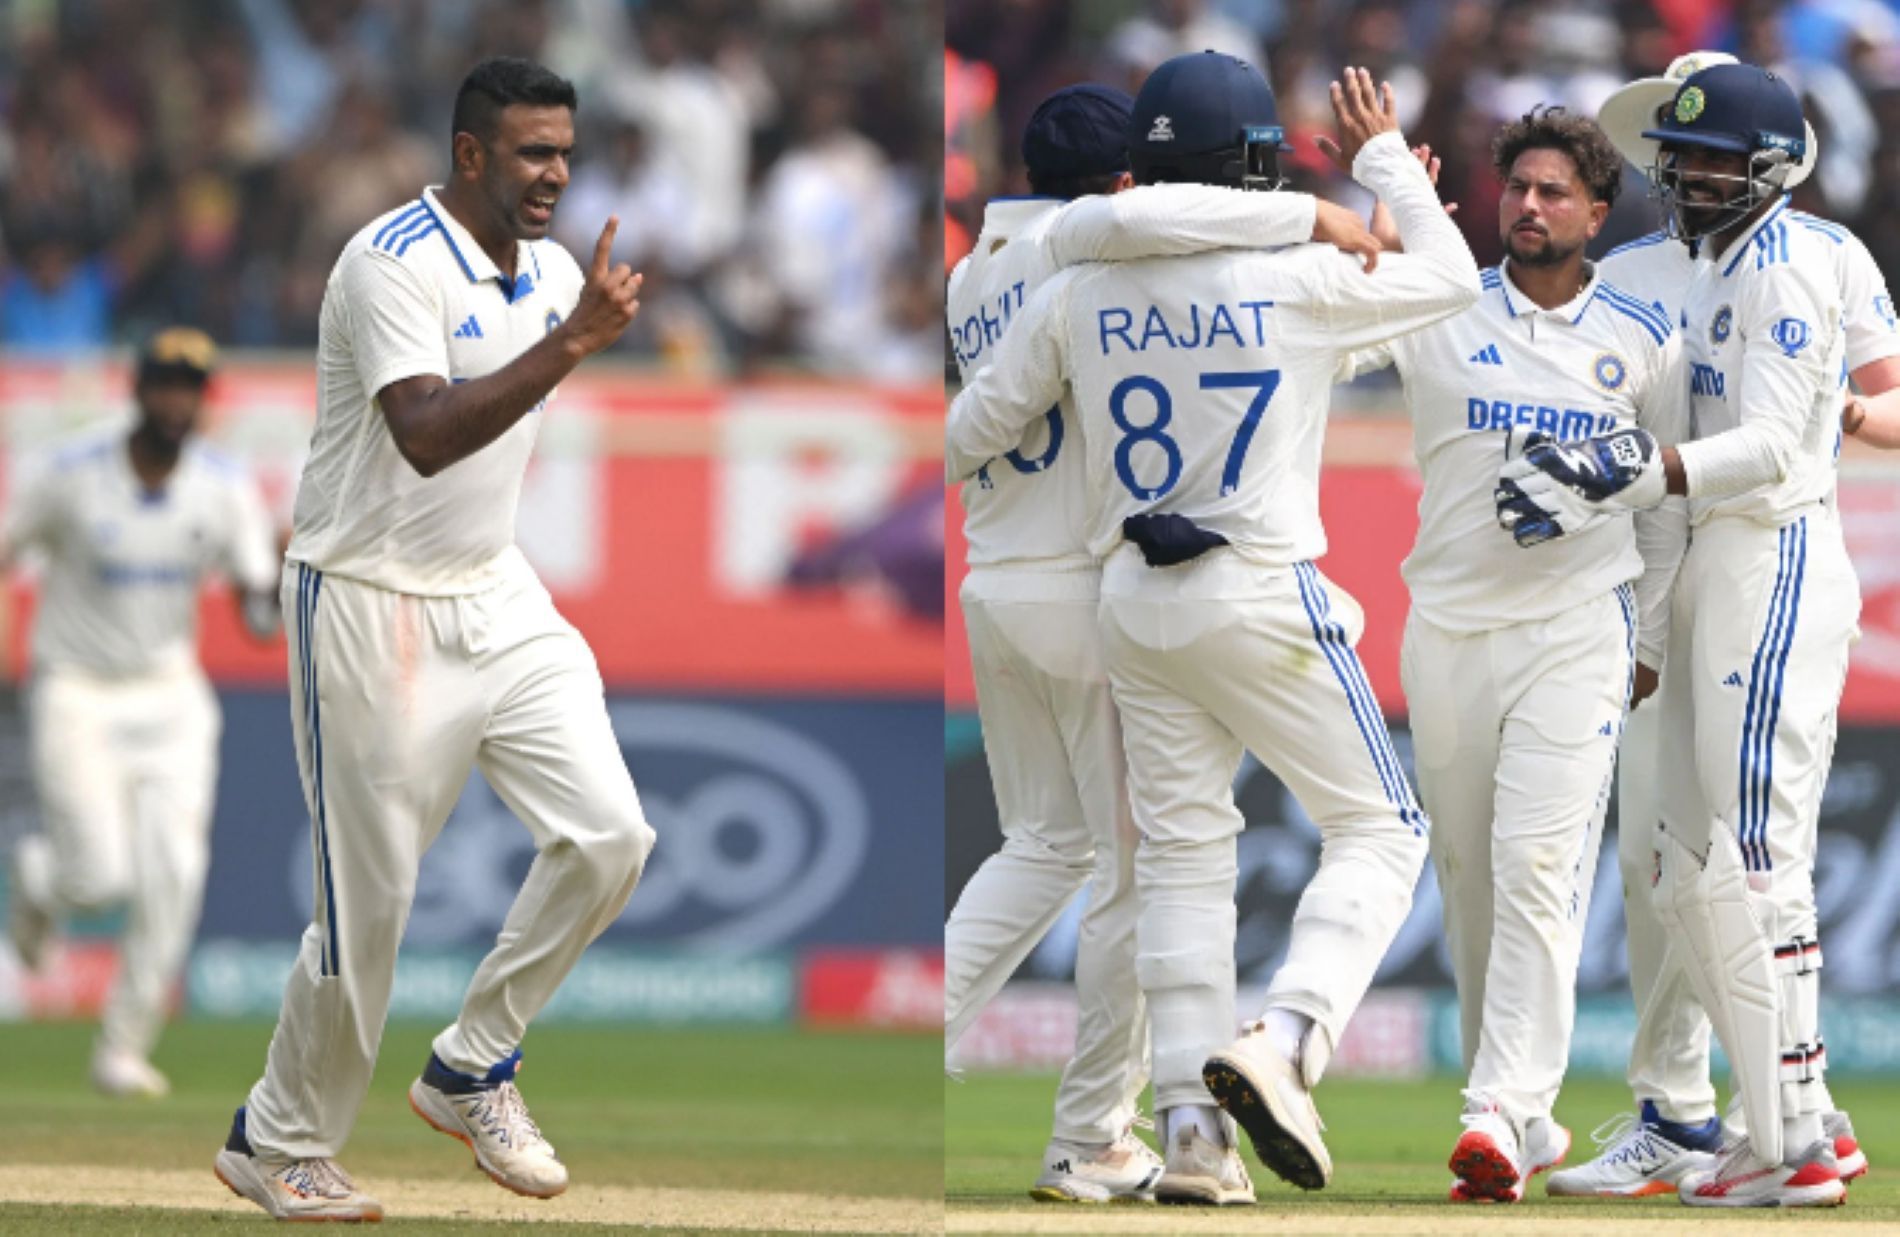 The spin duo played vital roles in helping India level the series